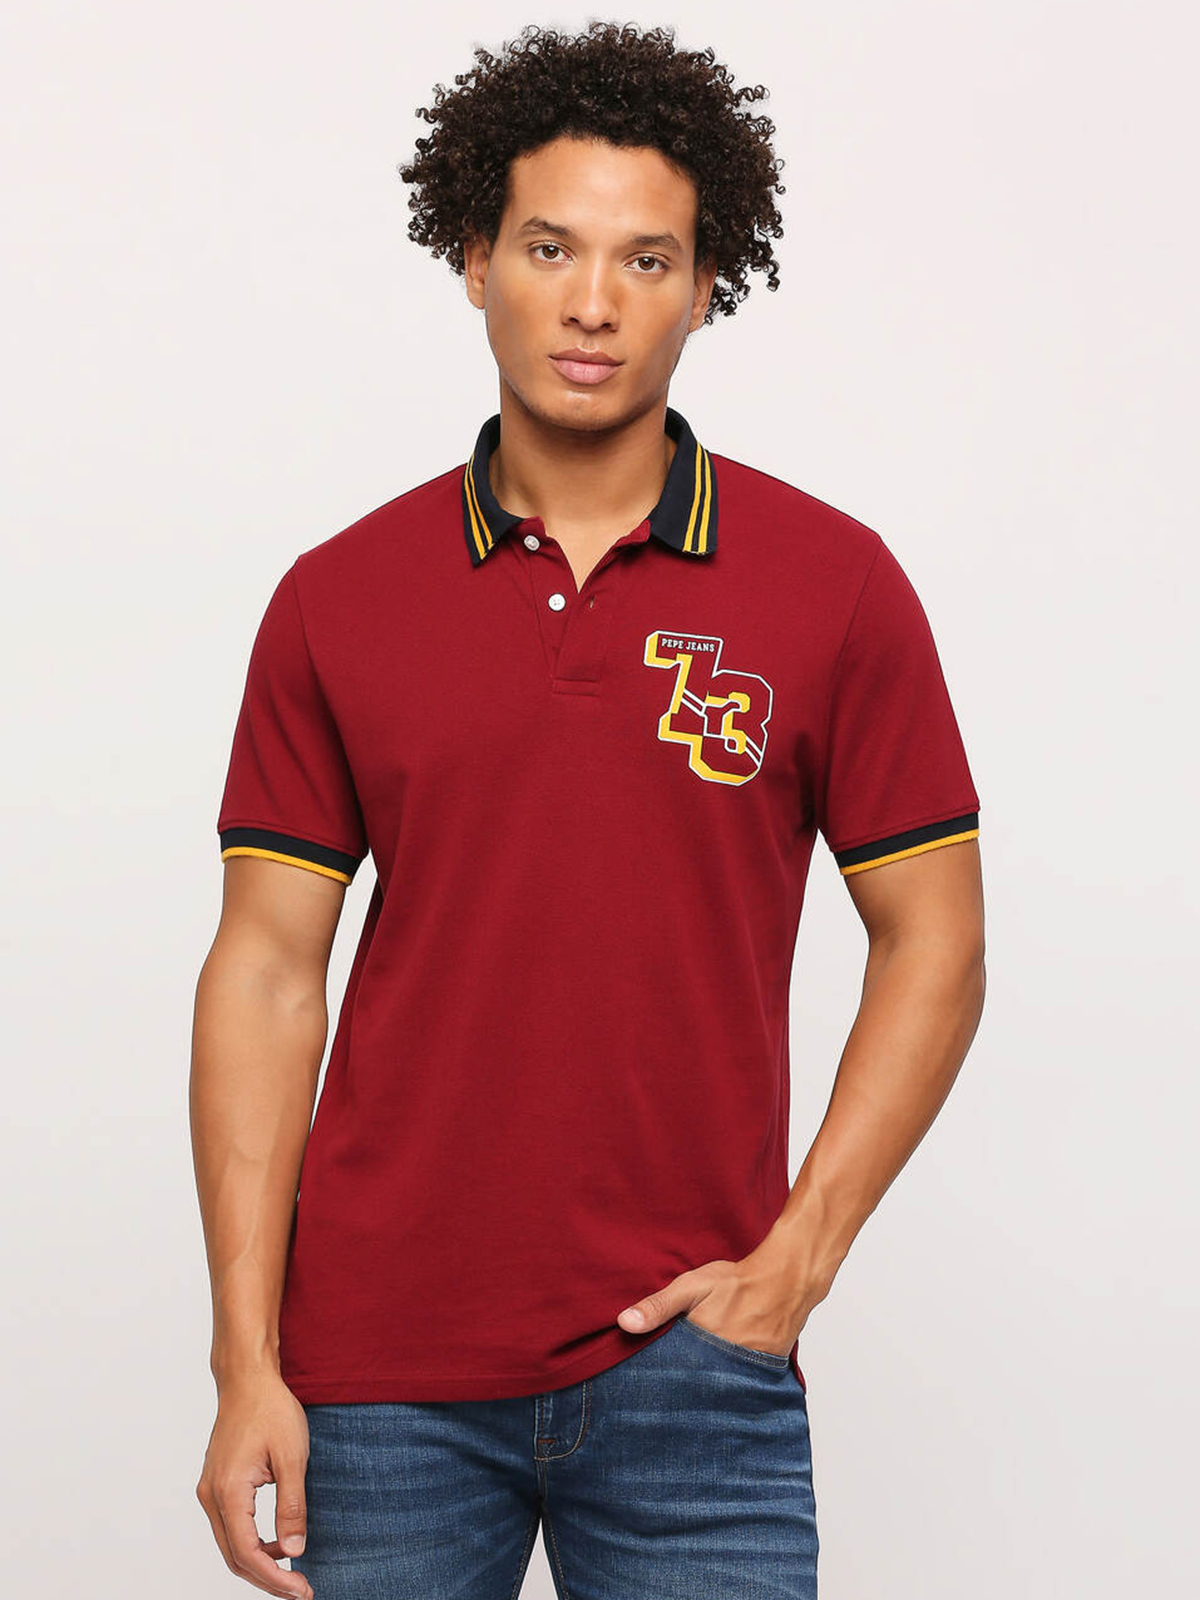 Buy Pepe Jeans Mens T-shirts Online